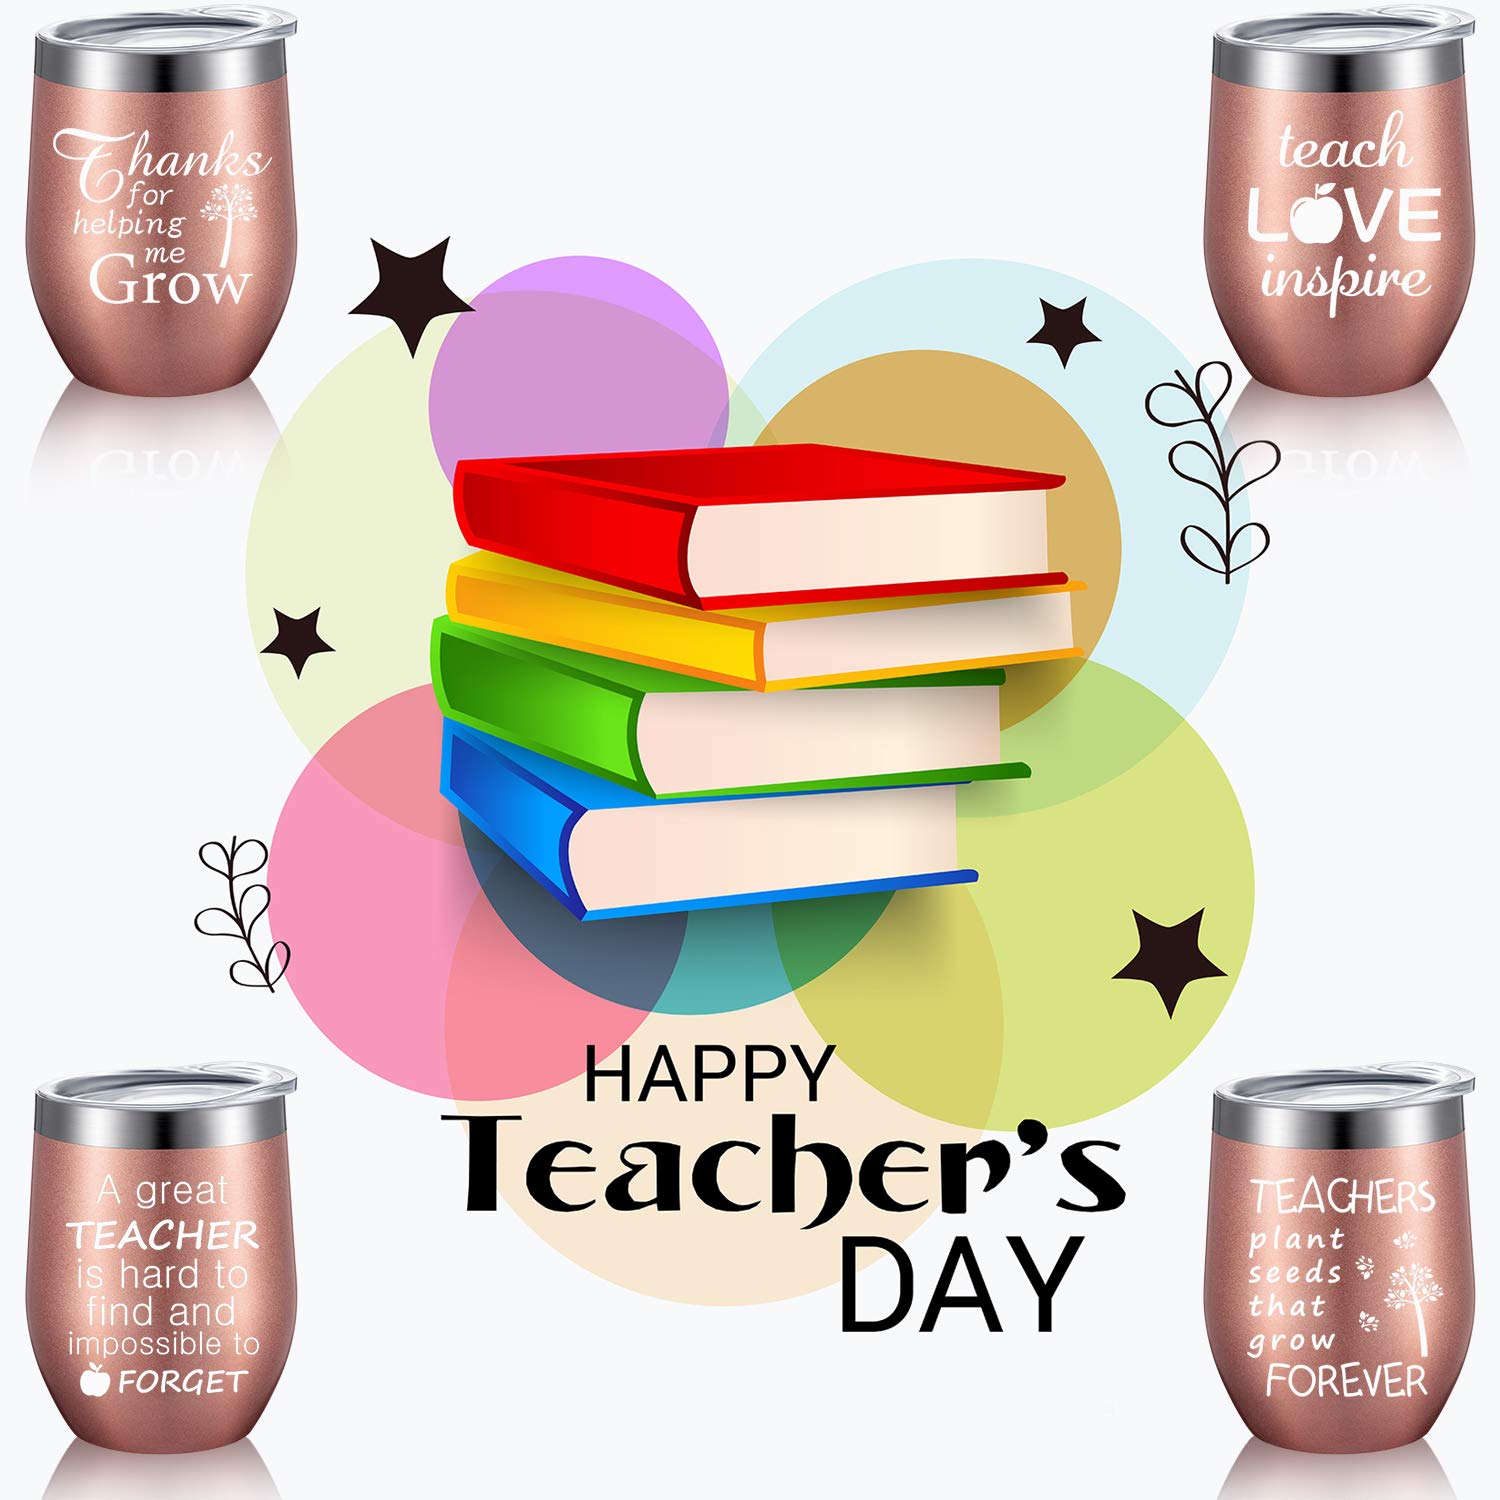 Boao 4 Pieces Teacher Gifts Wine Tumbler Set Teacher Appreciation Gifts, Funny Thank You Birthday Graduation Christmas Gifts for Teachers Professors, 12oz Coffee Mug with Lid Straw (Rose Gold)